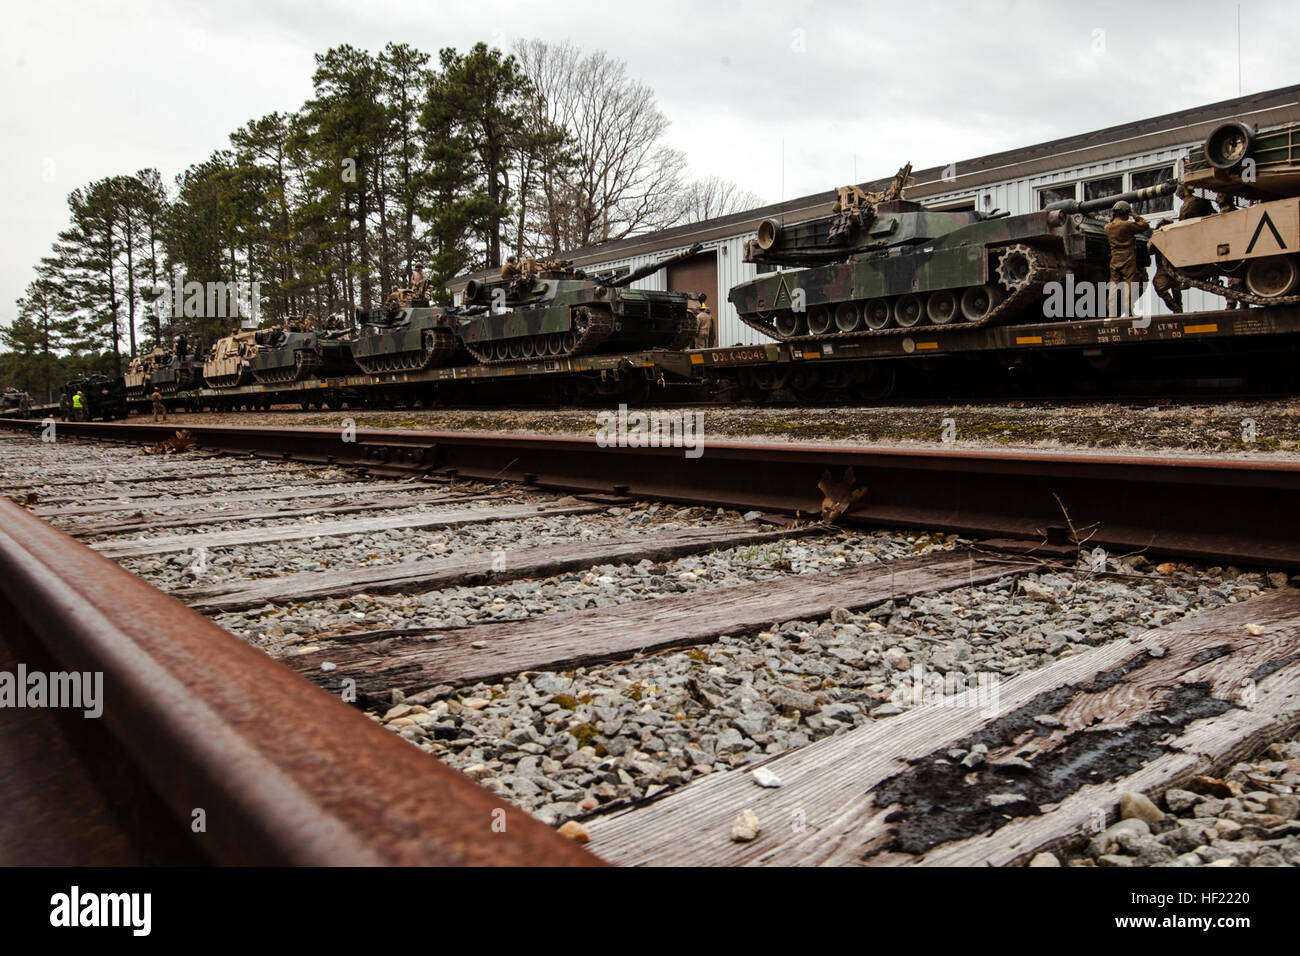 U.S. Marine Corps M1A1 Abrams tanks and M88 A2 Hercules Recovery Vehicles are prepared to be unloaded from railcars during a Deployment for Training (DFT) Exercise at Fort Pickett, Va., March 28, 2014. The DFT is conducted to strengthen the unit's proficiency in a combat environment.  (U.S. Marine Corps photo by Lance Cpl. Kelly Timney, 2nd MarDiv, Combat Camera/Released) 2nd Tank Battalion Deployment for Training Exercise (DFT) 140328-M-OU200-223 Stock Photo